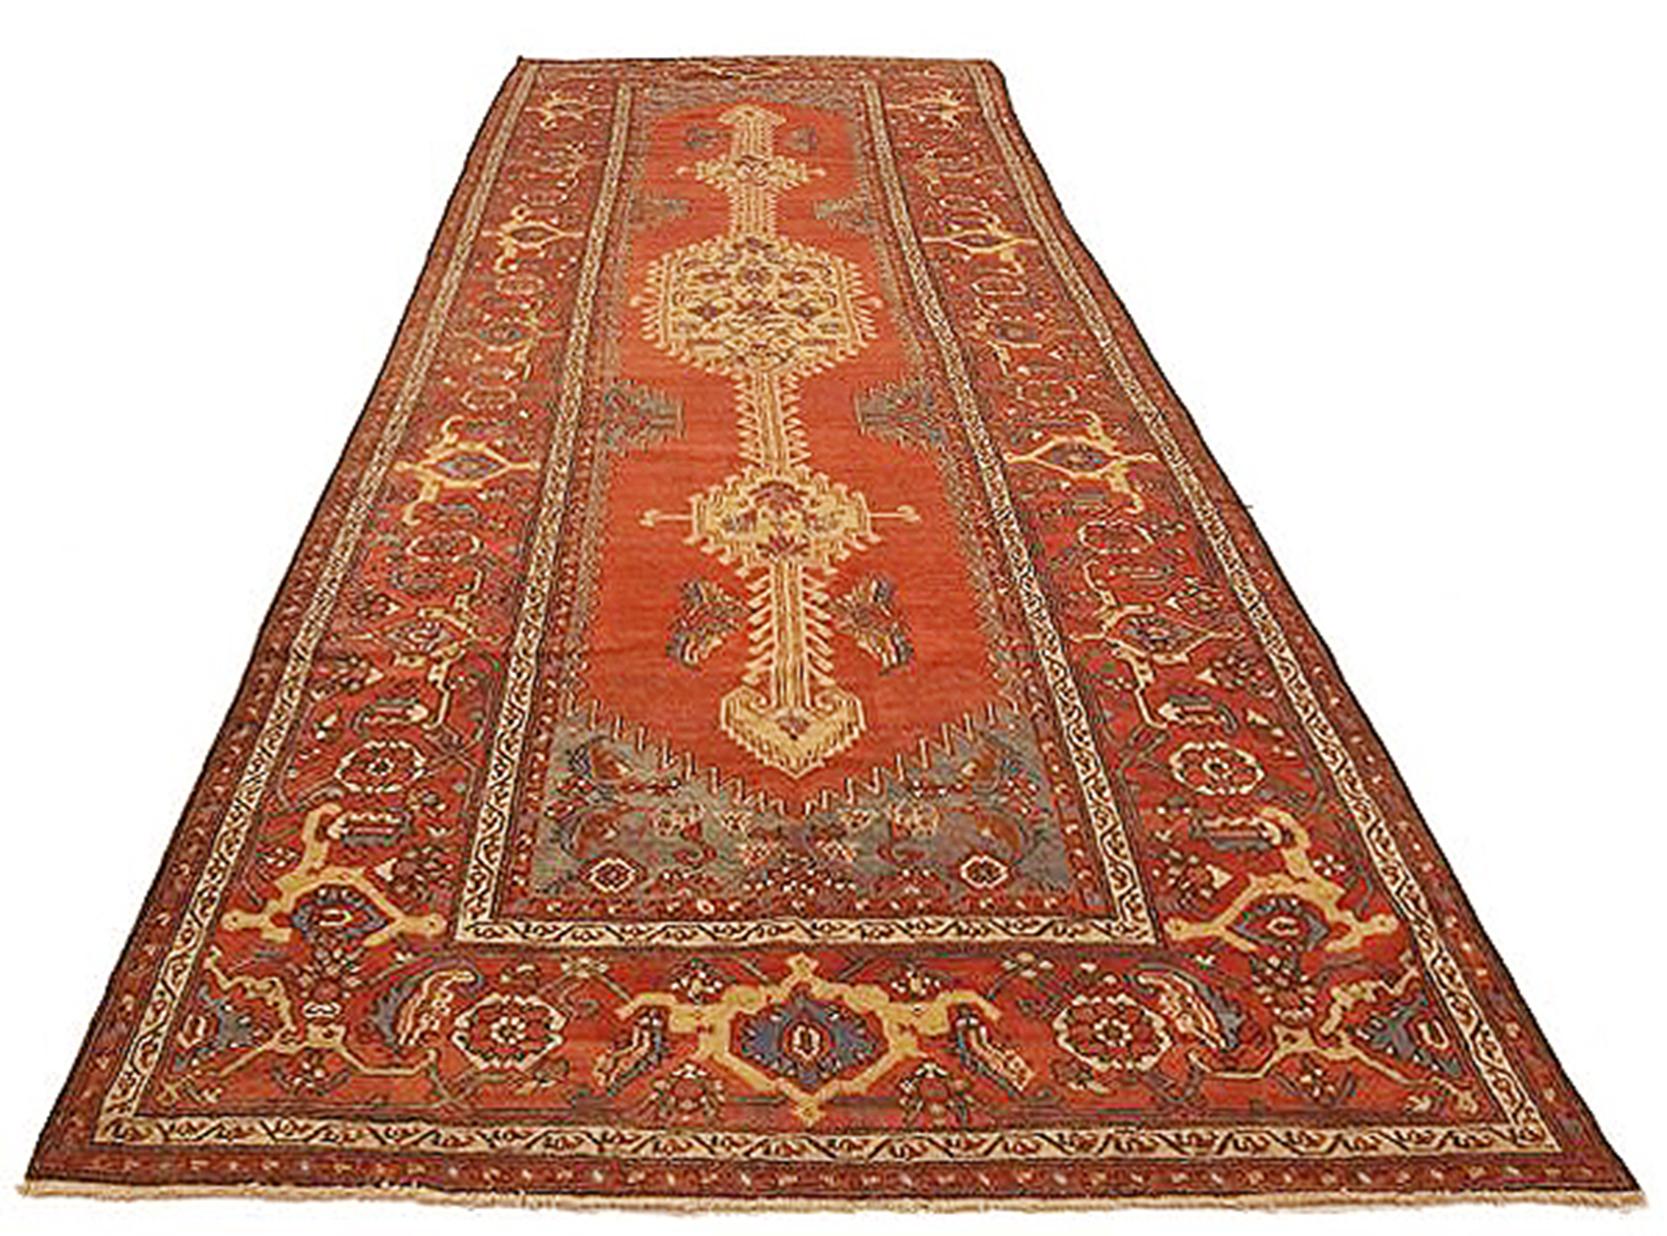 Antique Azerbaijan rug handwoven from the finest sheep’s wool and colored with all-natural vegetable dyes that are safe for humans and pets. It’s a traditional Azerbaijani design featuring mixed floral and geometric details over a deep red field. It